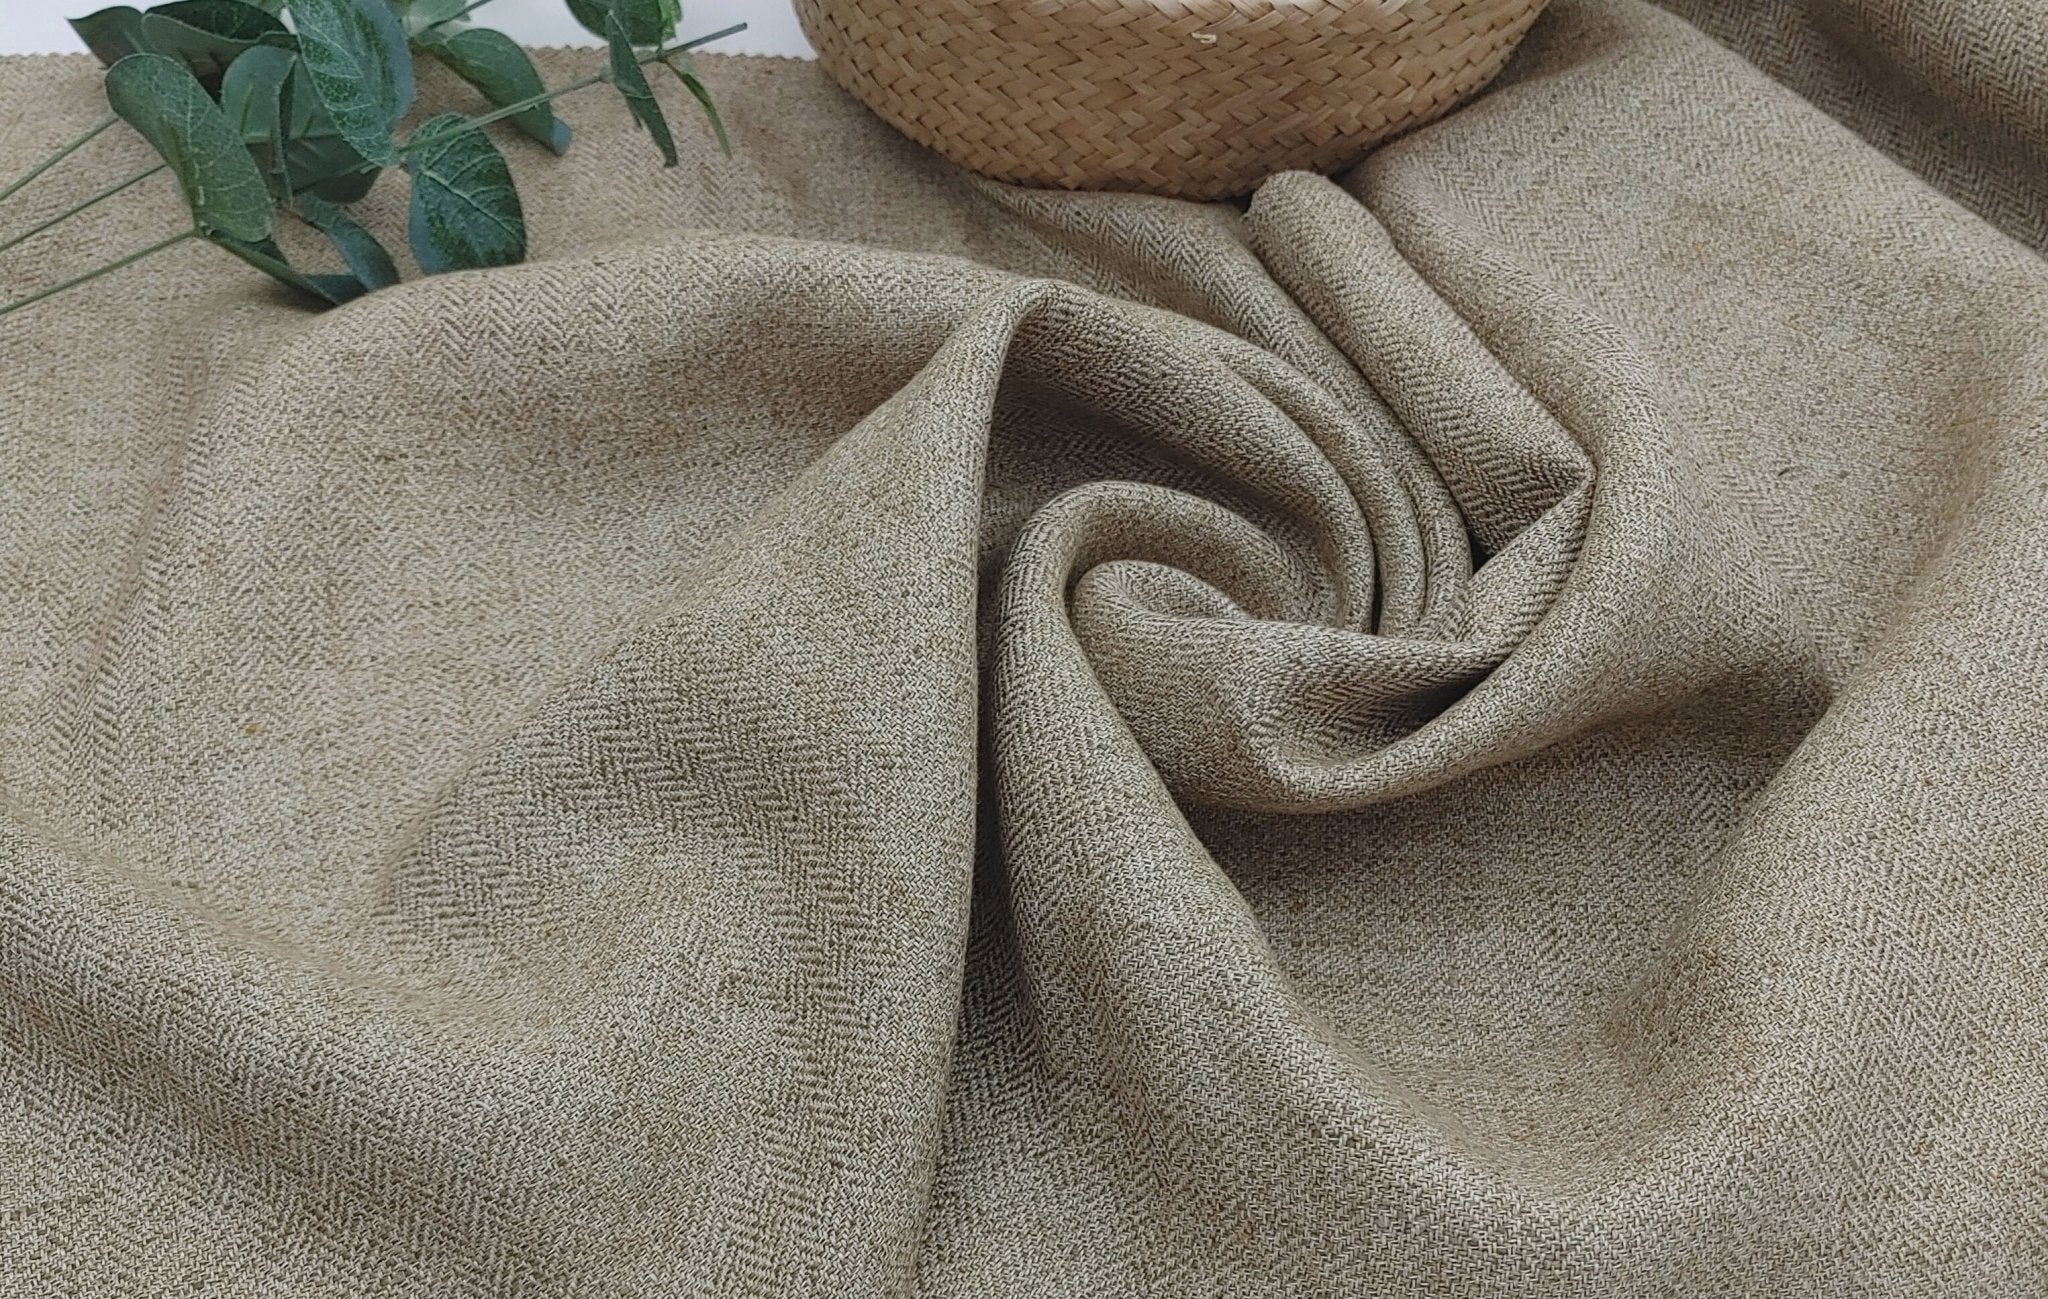 Linen Polyester HBT Herringbone Twill Fabric with Melange Effect Heavy Weight 7353 7821 - The Linen Lab - Brown